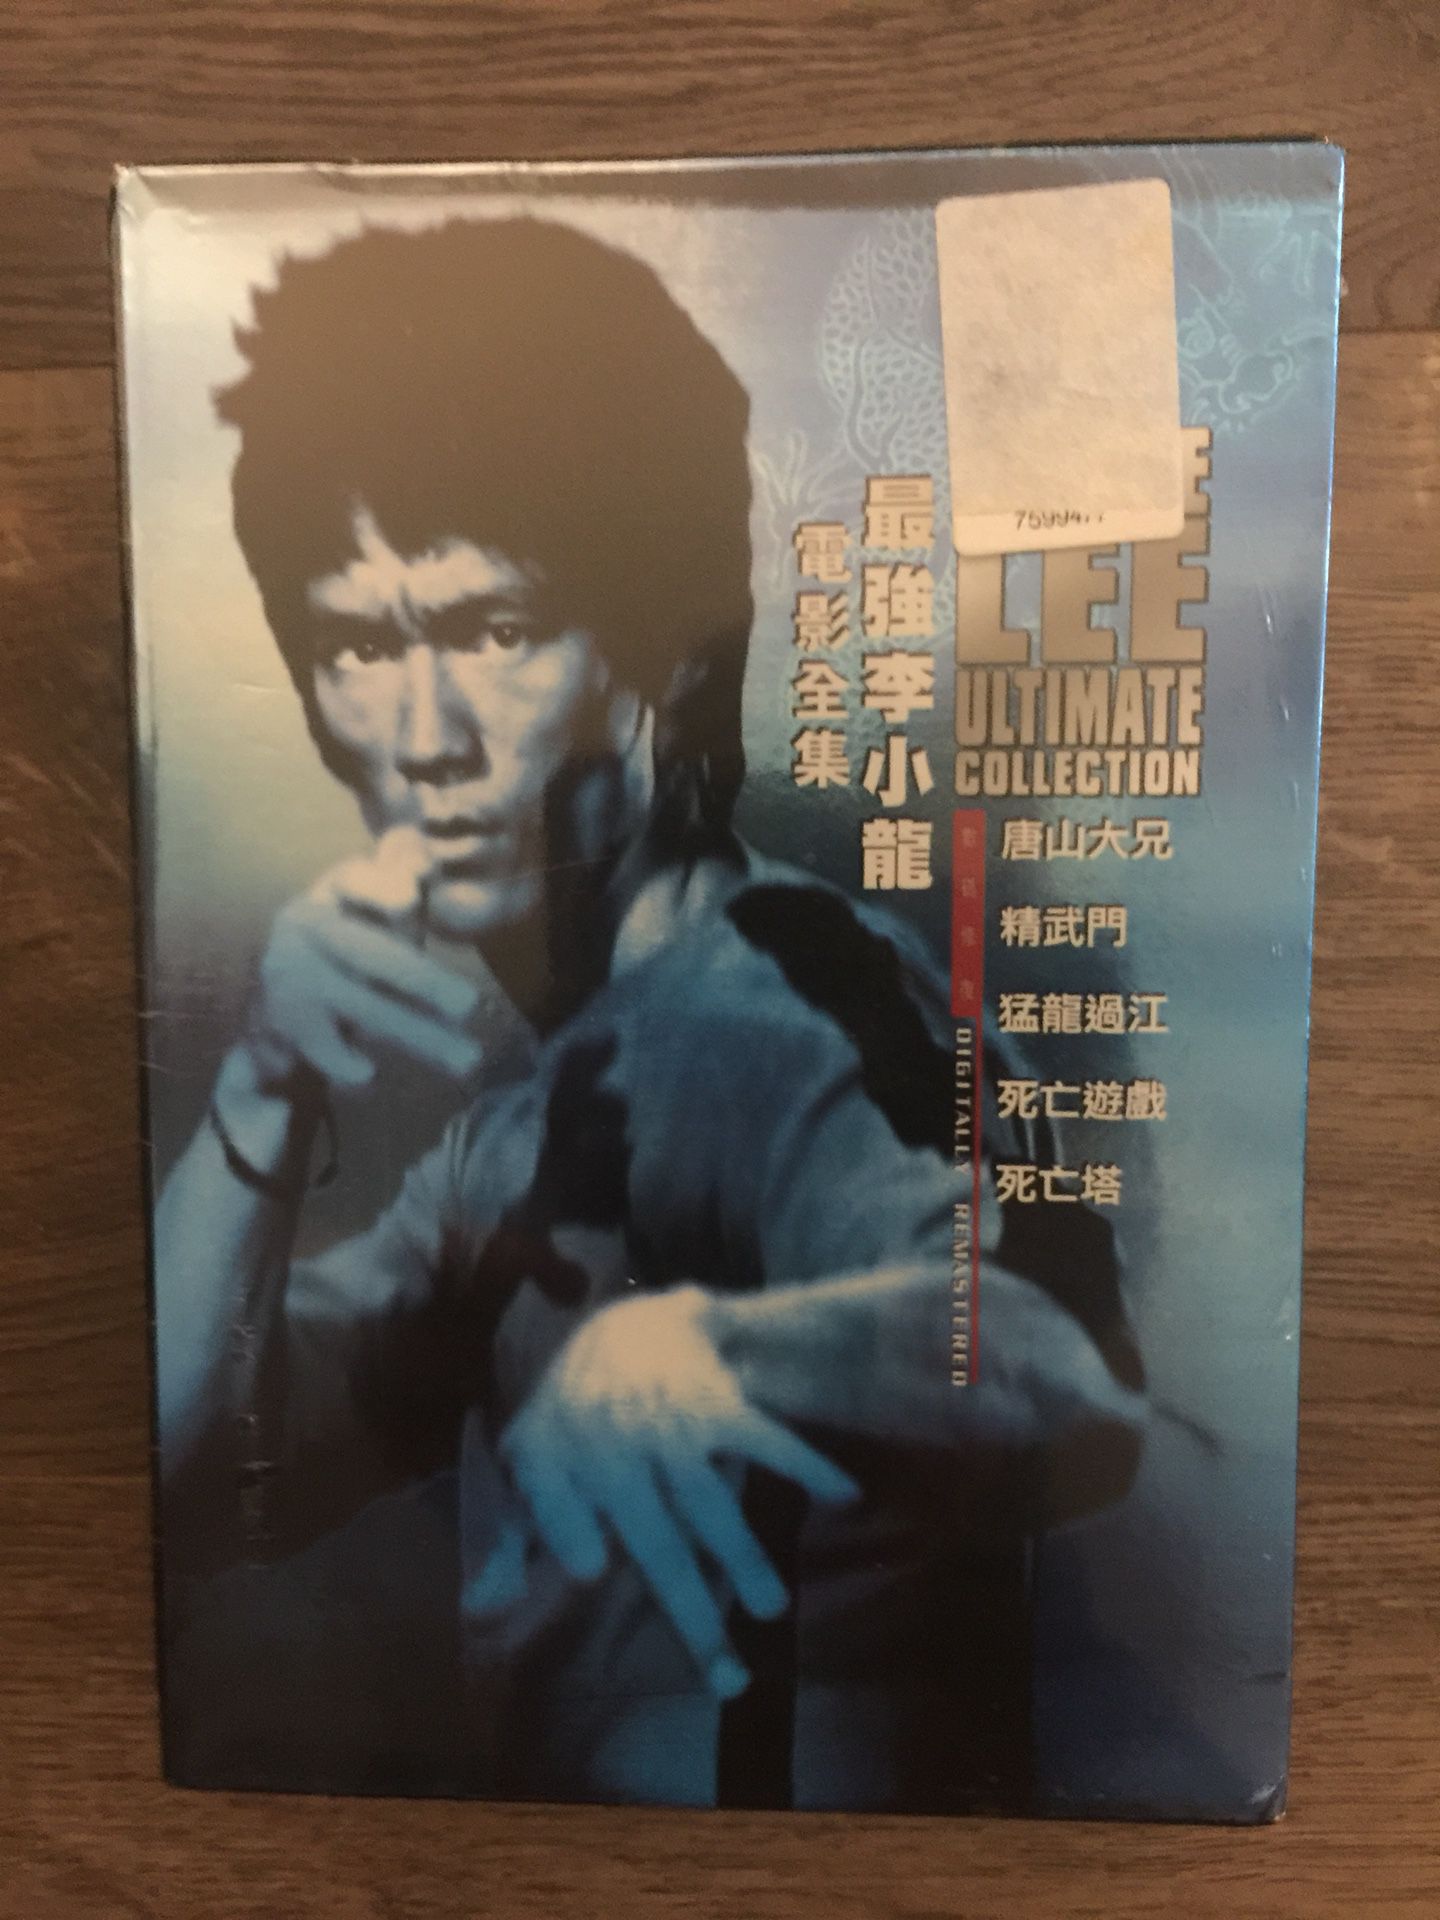 Bruce Lee Ultimate Collection - DVD boxed set; new and unopened